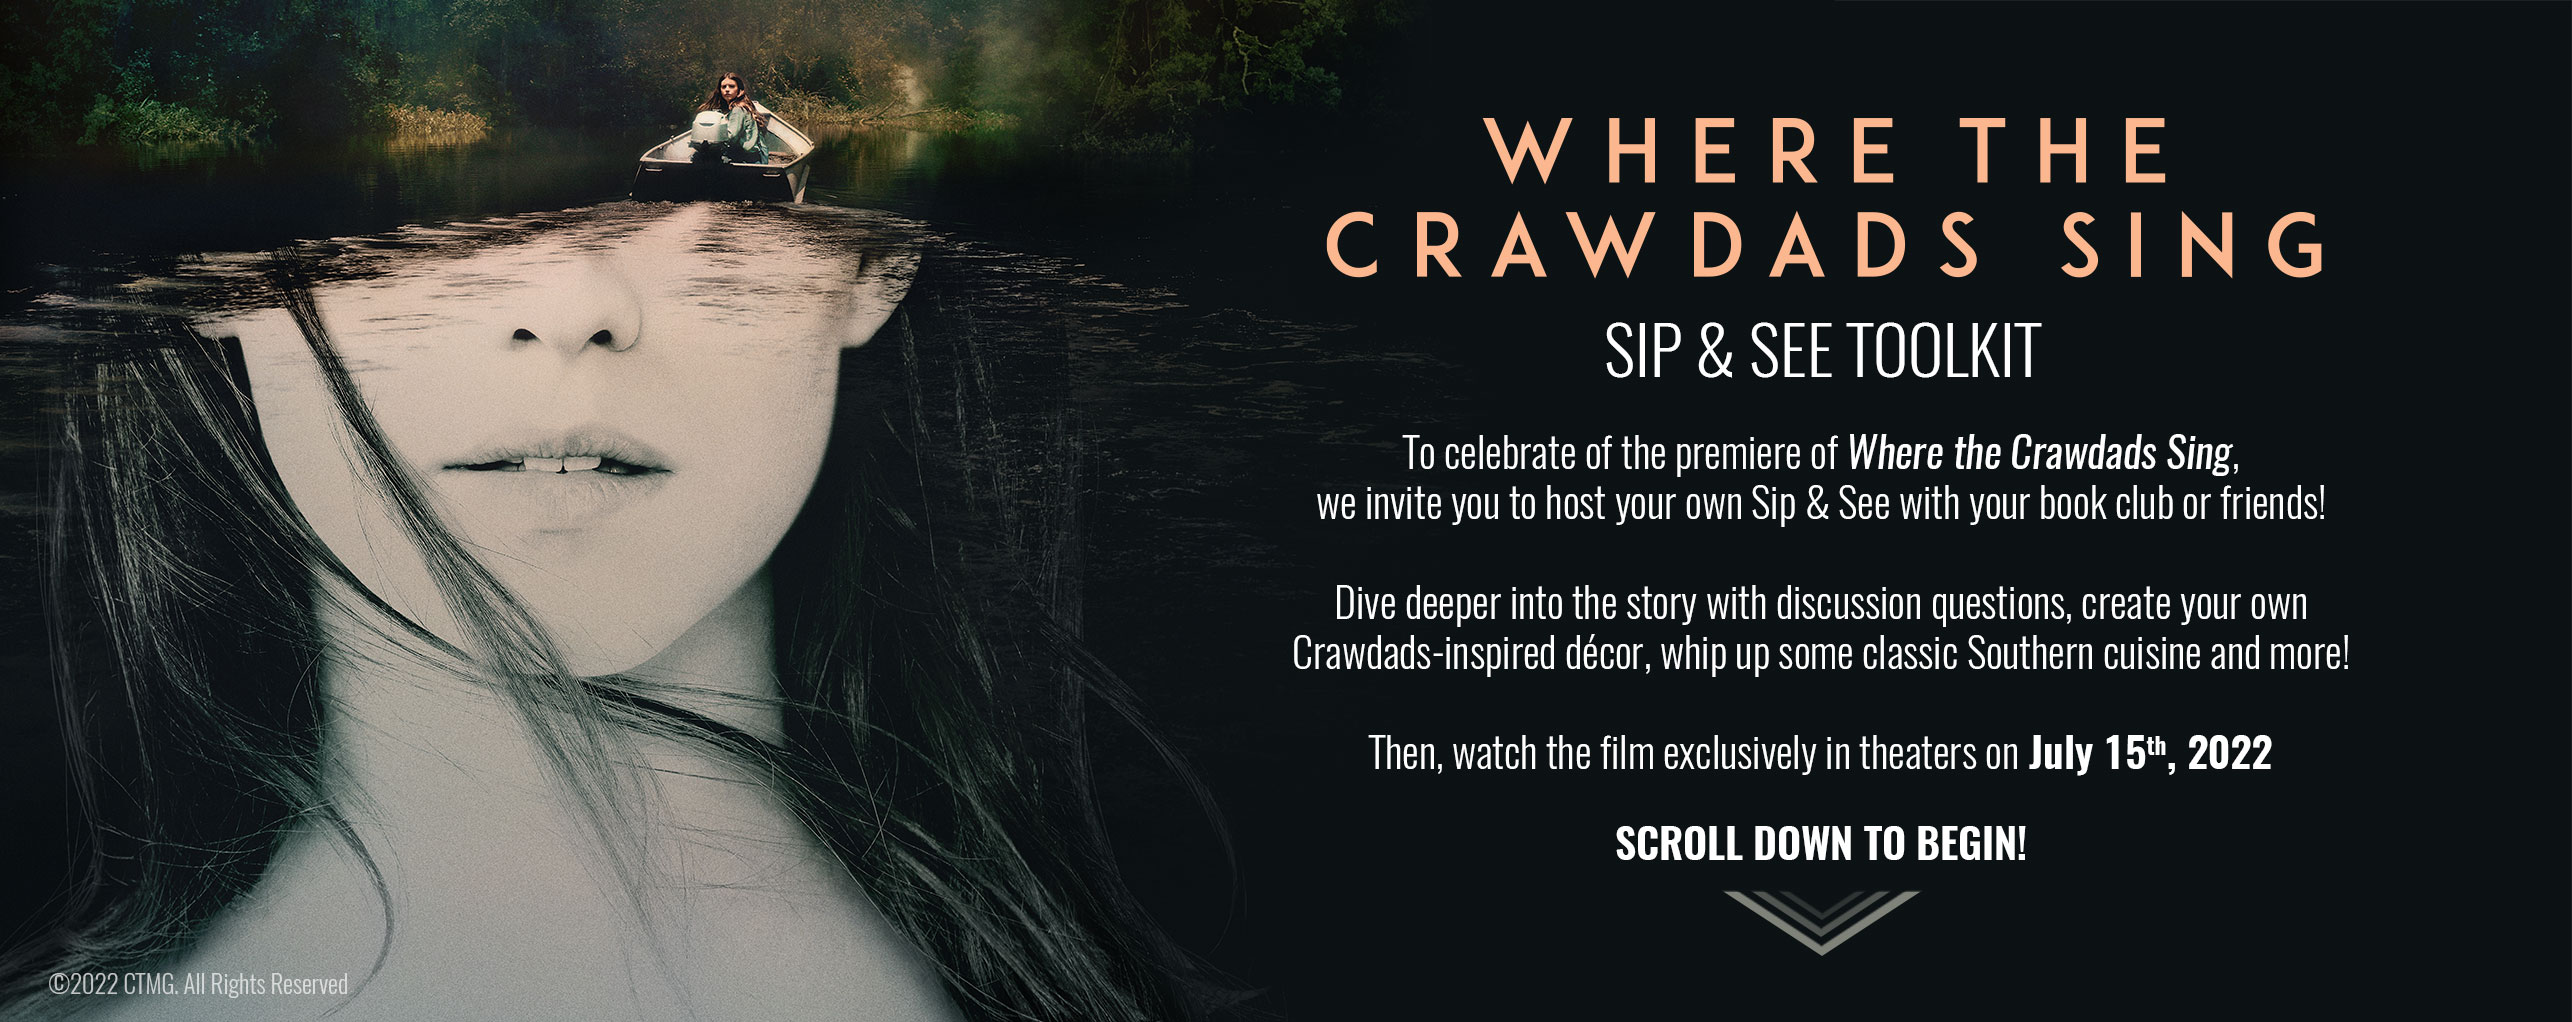 Where the Crawdads Sing Sip & See Toolkit 